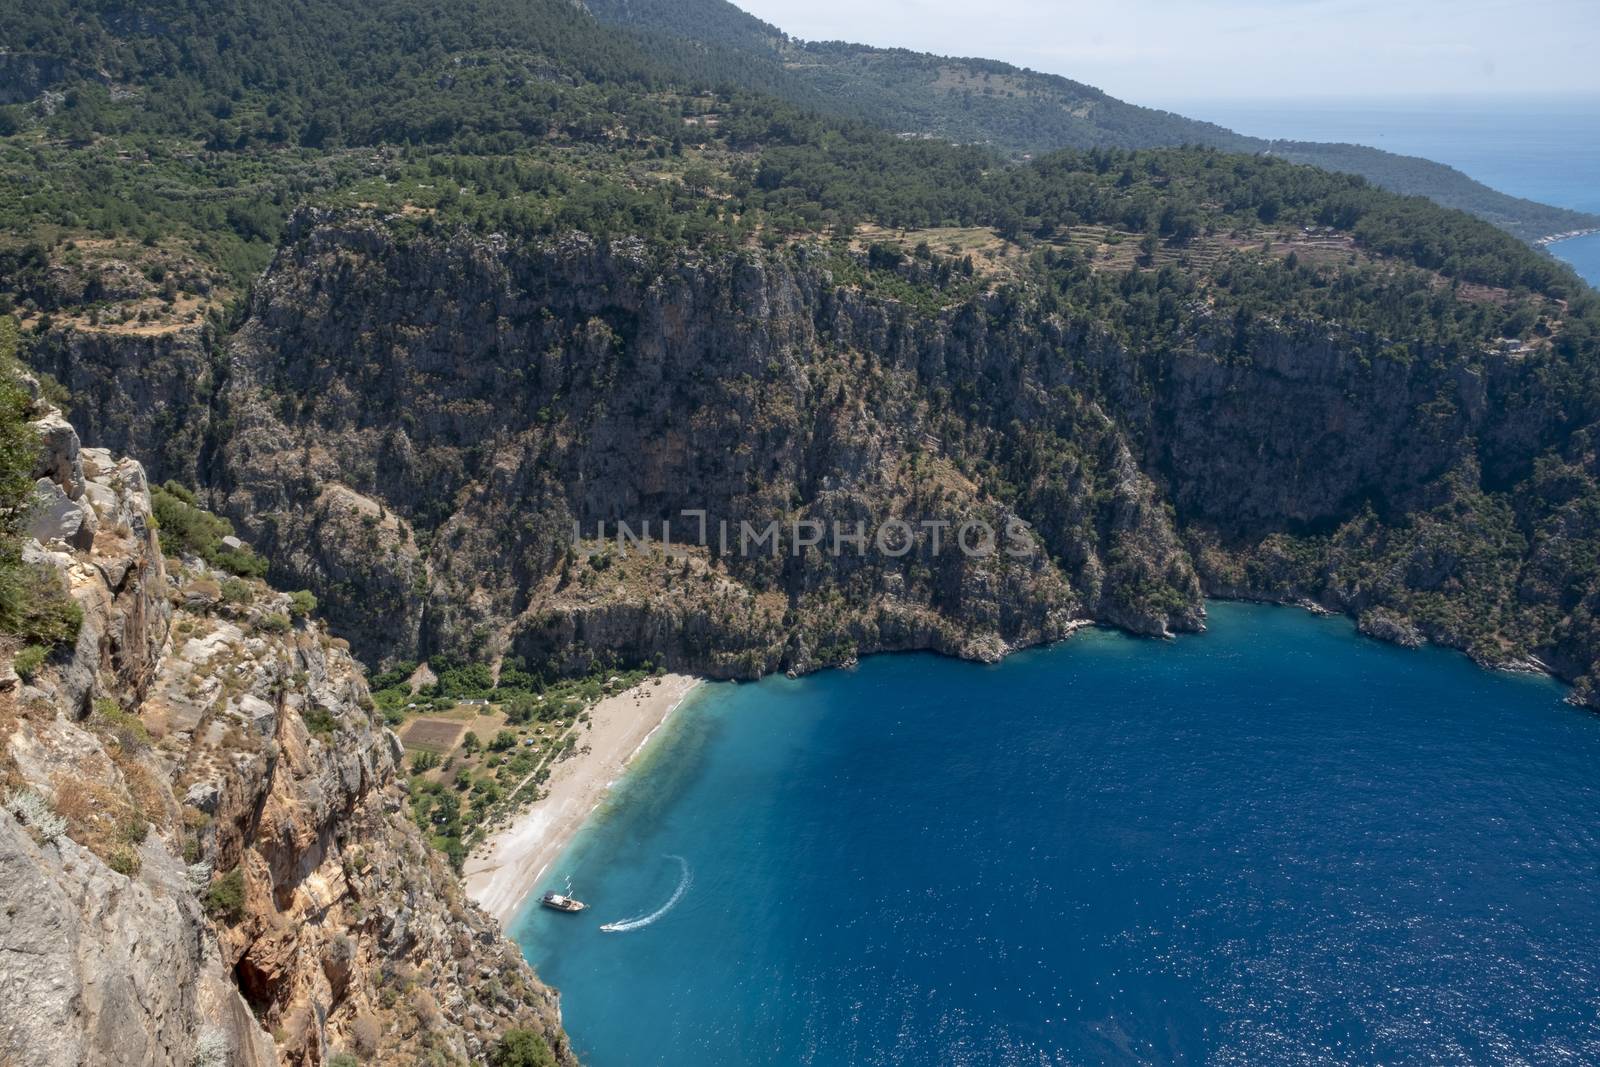 Kelebekler vadisi. Forest and beautiful sea in Mediterranean. butterfly Valley by oaltindag